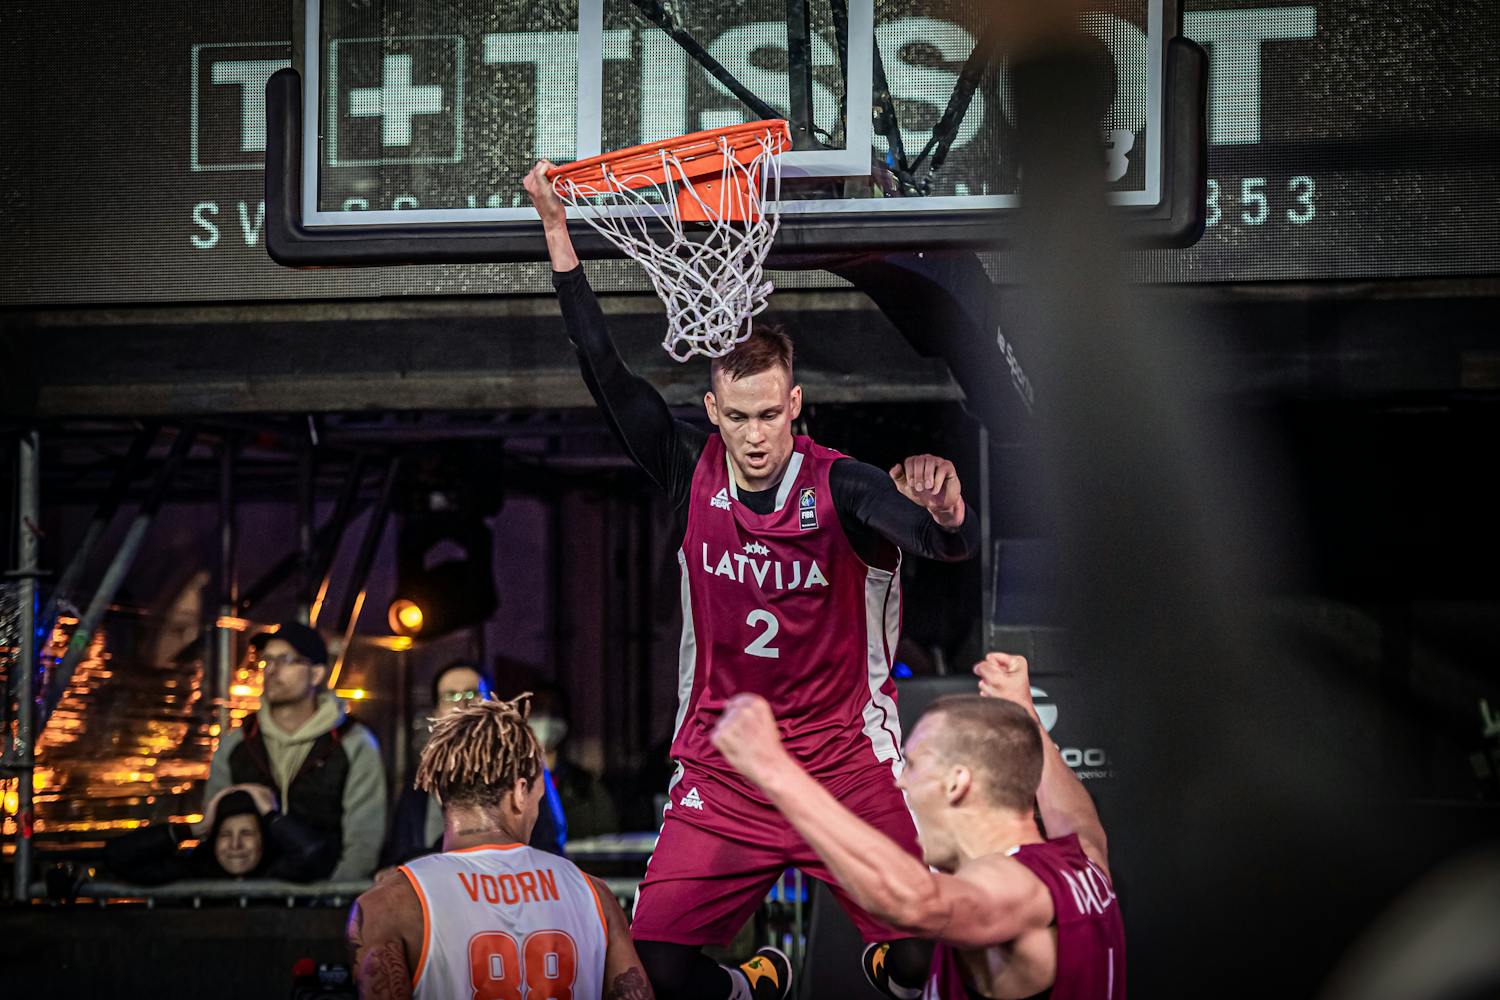 USA and Latvia dominate on Day 2 of FIBA 3x3 Olympic Qualifying Tournament